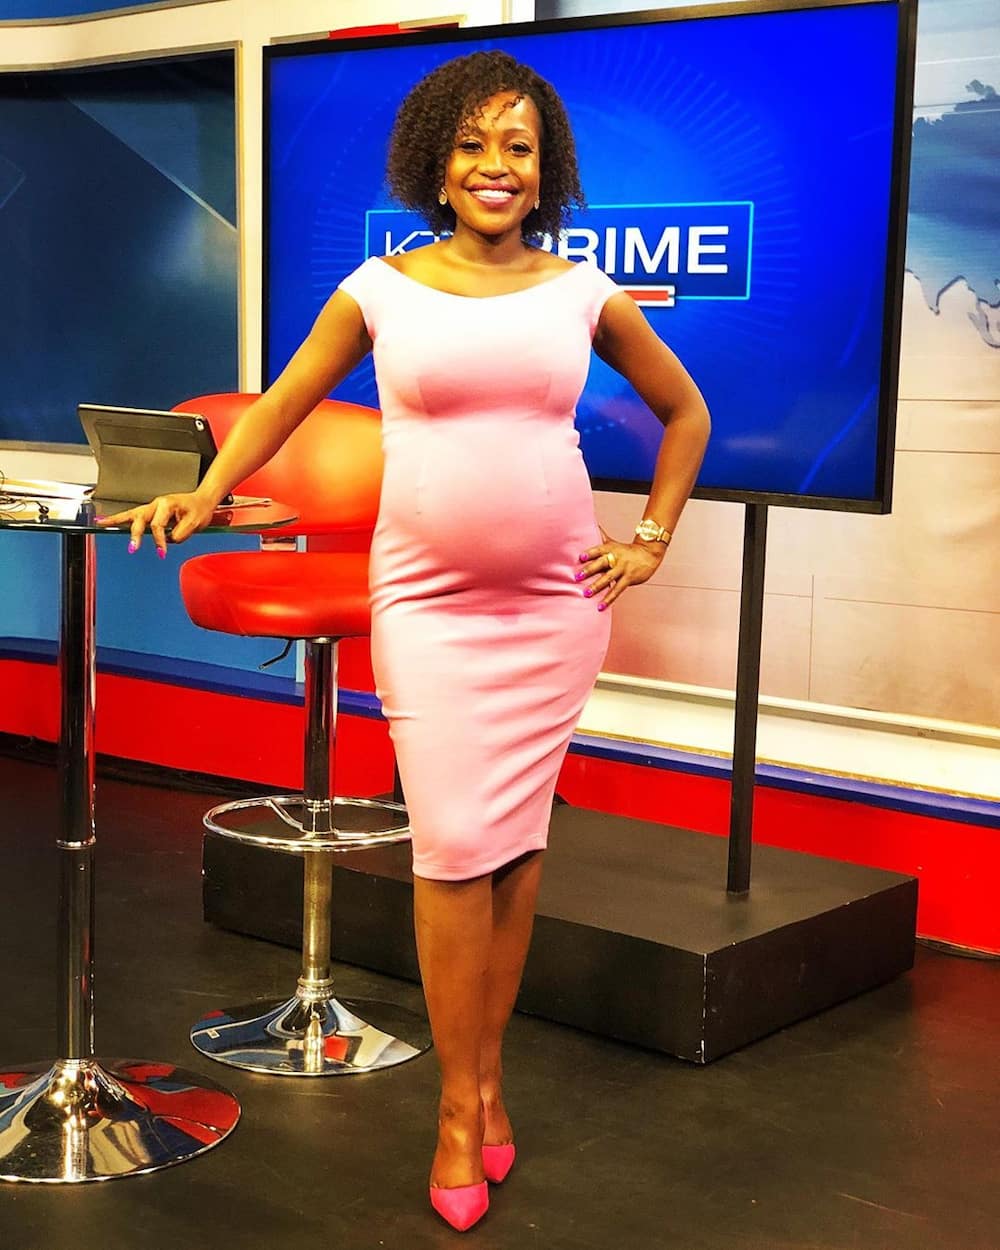 News anchor Sharon Momanyi announces she's pregnant with their first child